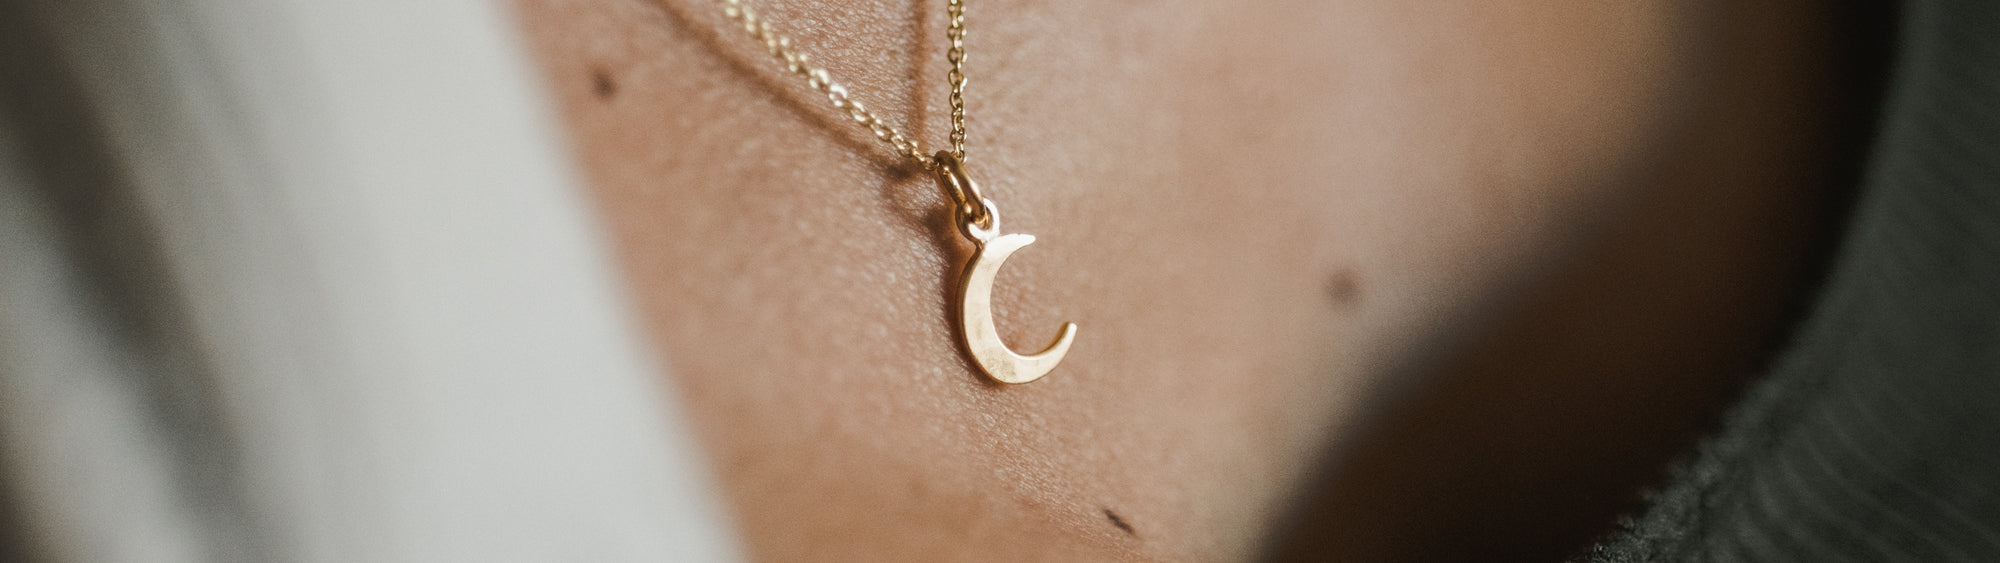 Close-up of a golden crescent moon pendant on a necklace resting against a person's neck.